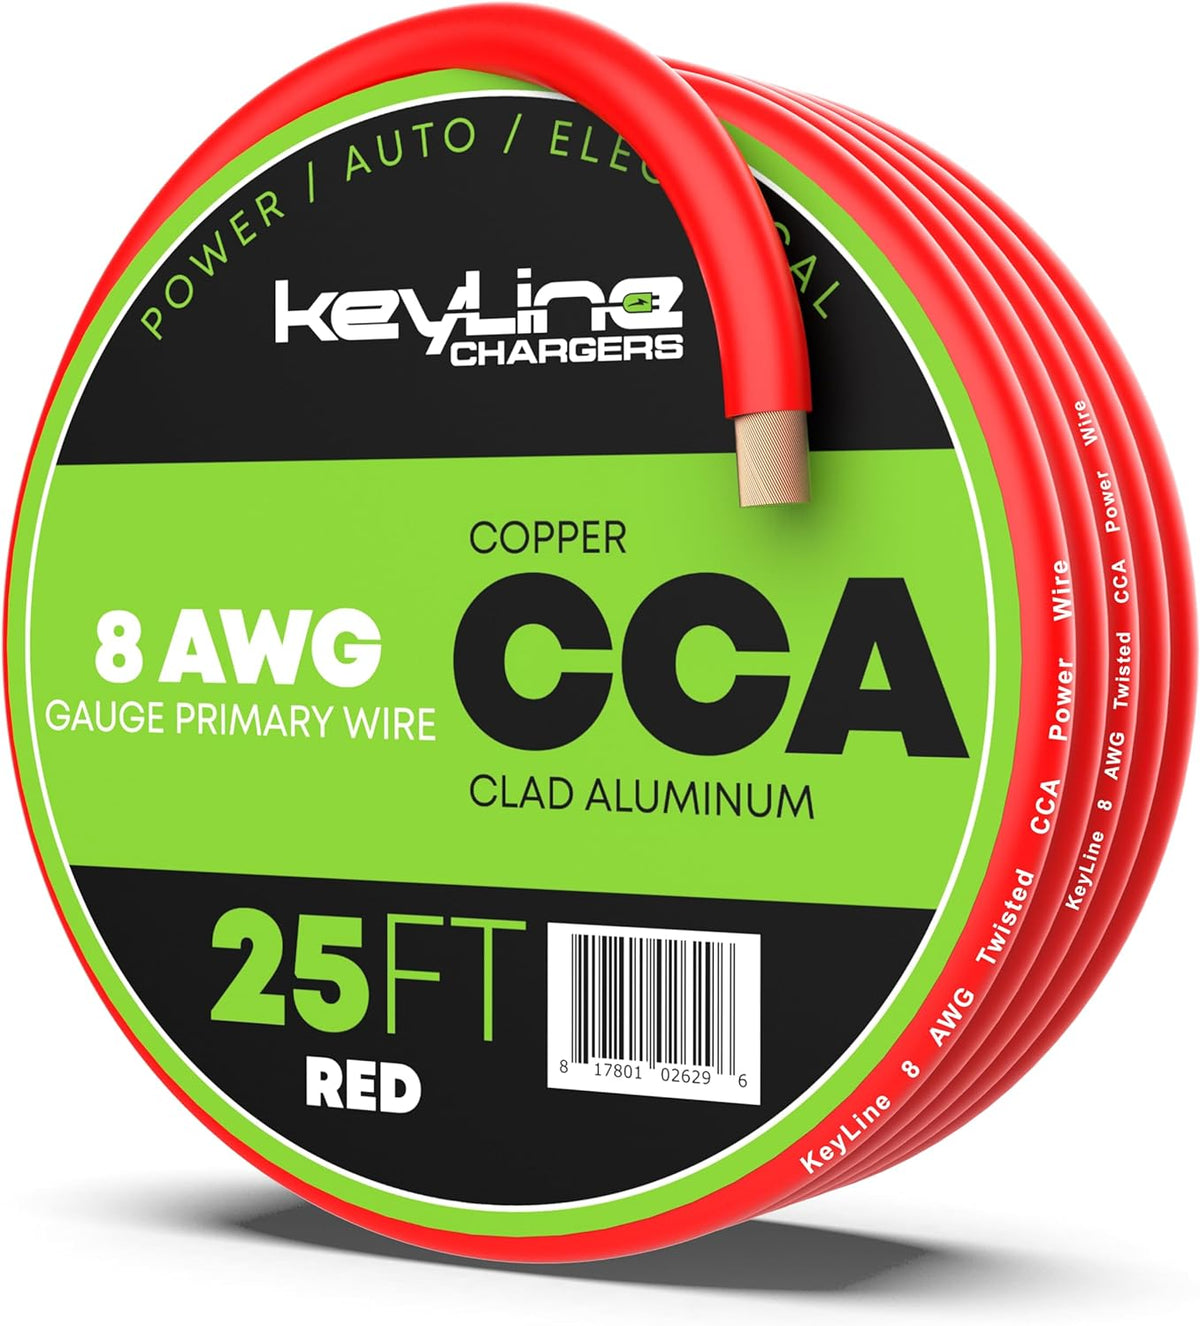 8 Gauge Wire - 25ft Red | 8 Gauge Amp Wire, Battery Cable, Marine Speaker Wire, Solar Cables for RV Trailer, Car Audio Speaker Cable, 8 AWG Automotive Wire Copper Clad Aluminum (CCA)